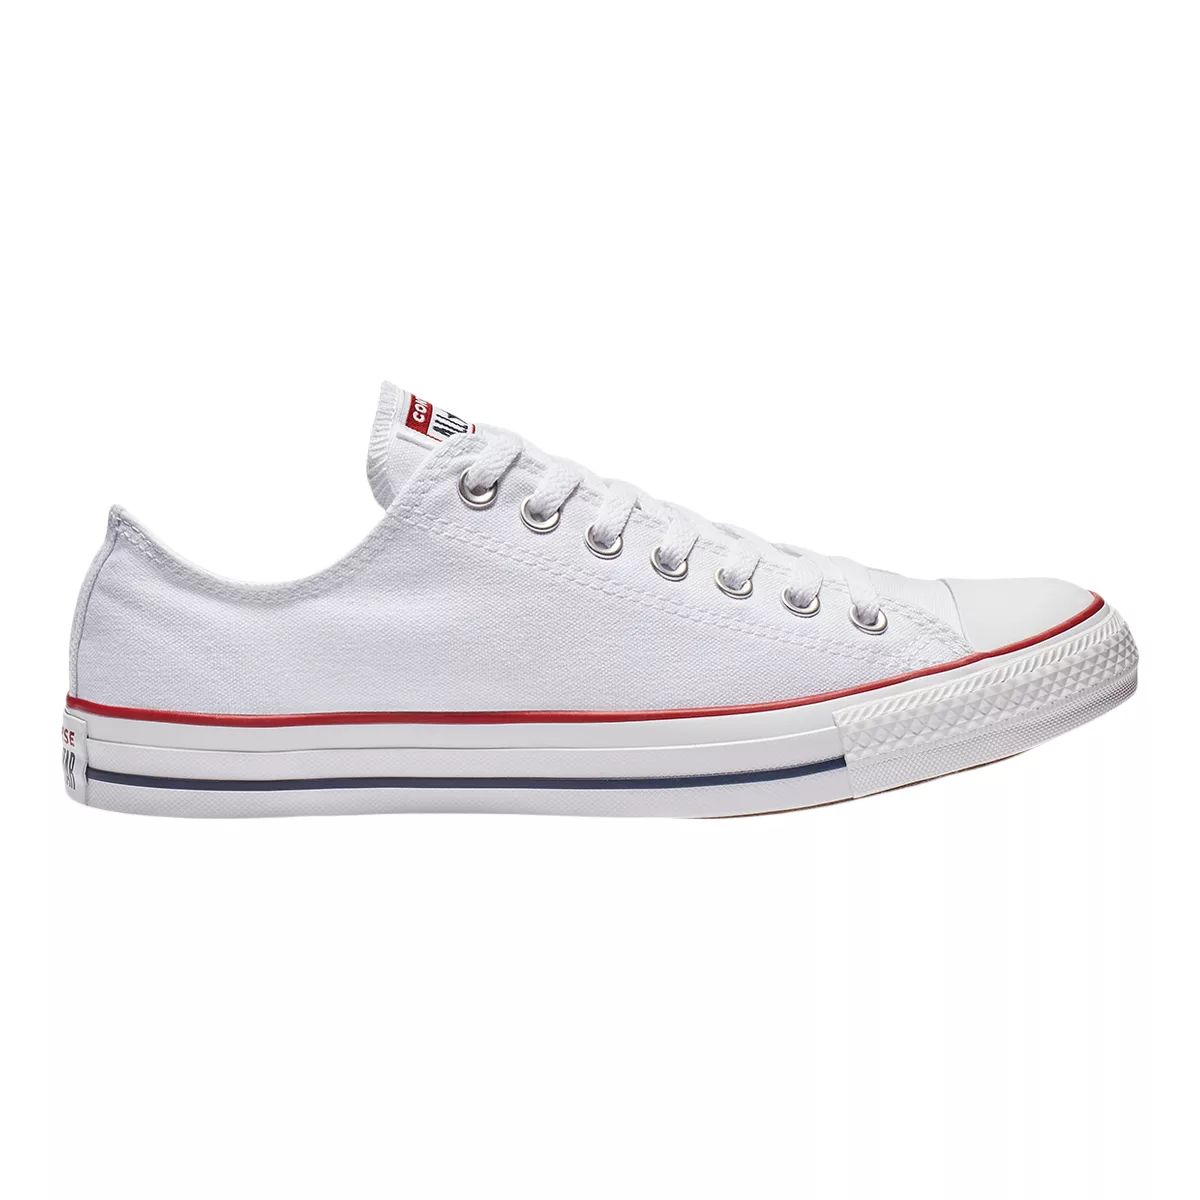 Converse Men's Chuck Taylor All Star Ox Shoes  Sneakers Basketball Low Top Canvas